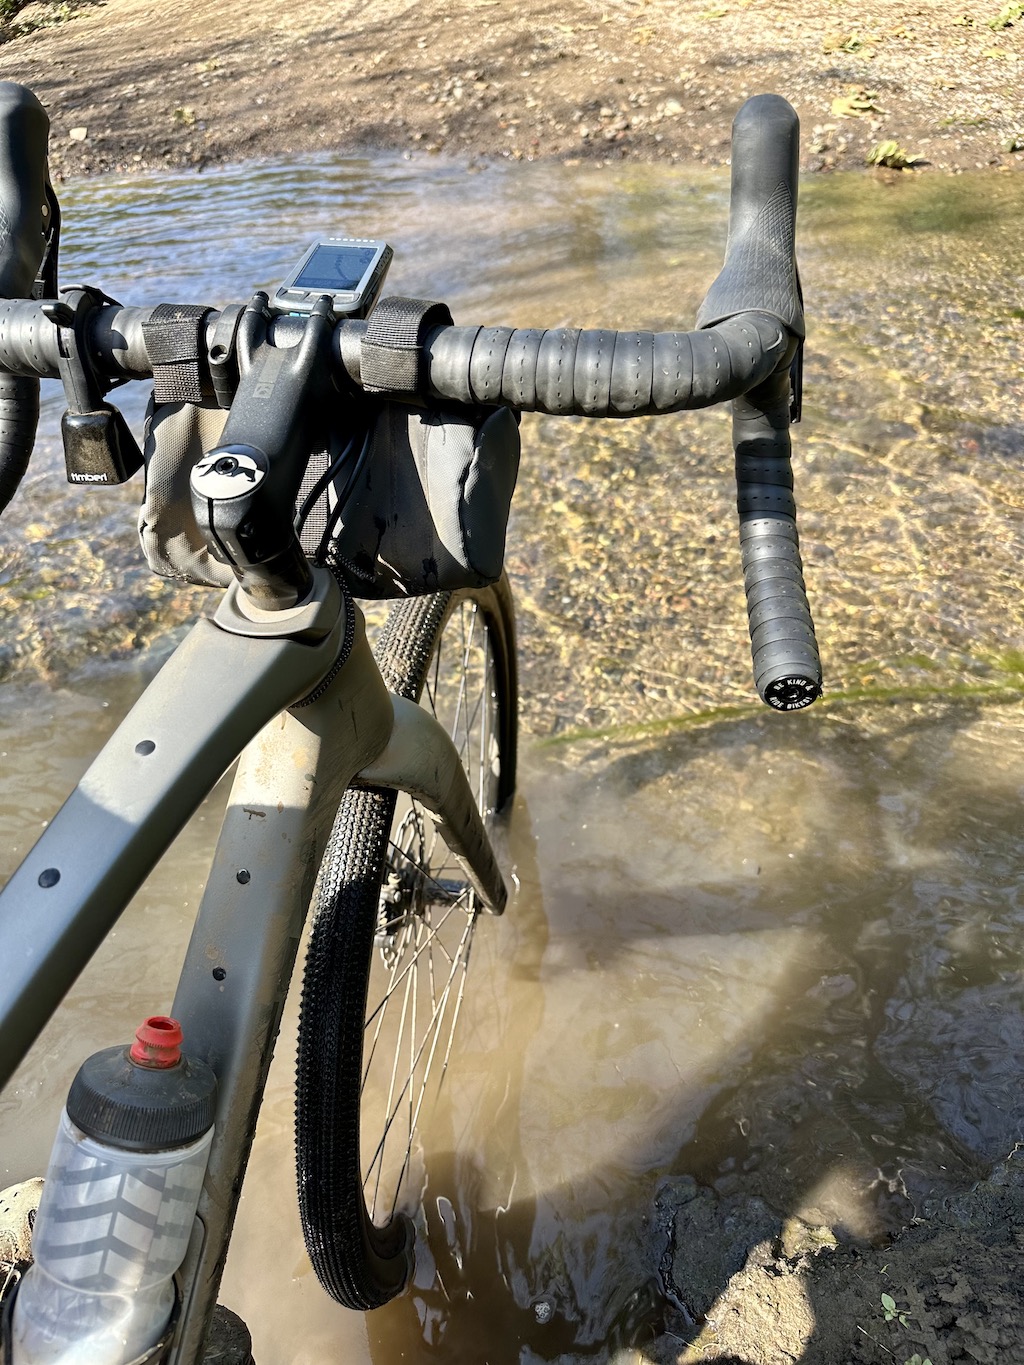 gravel bike in a few inches of water